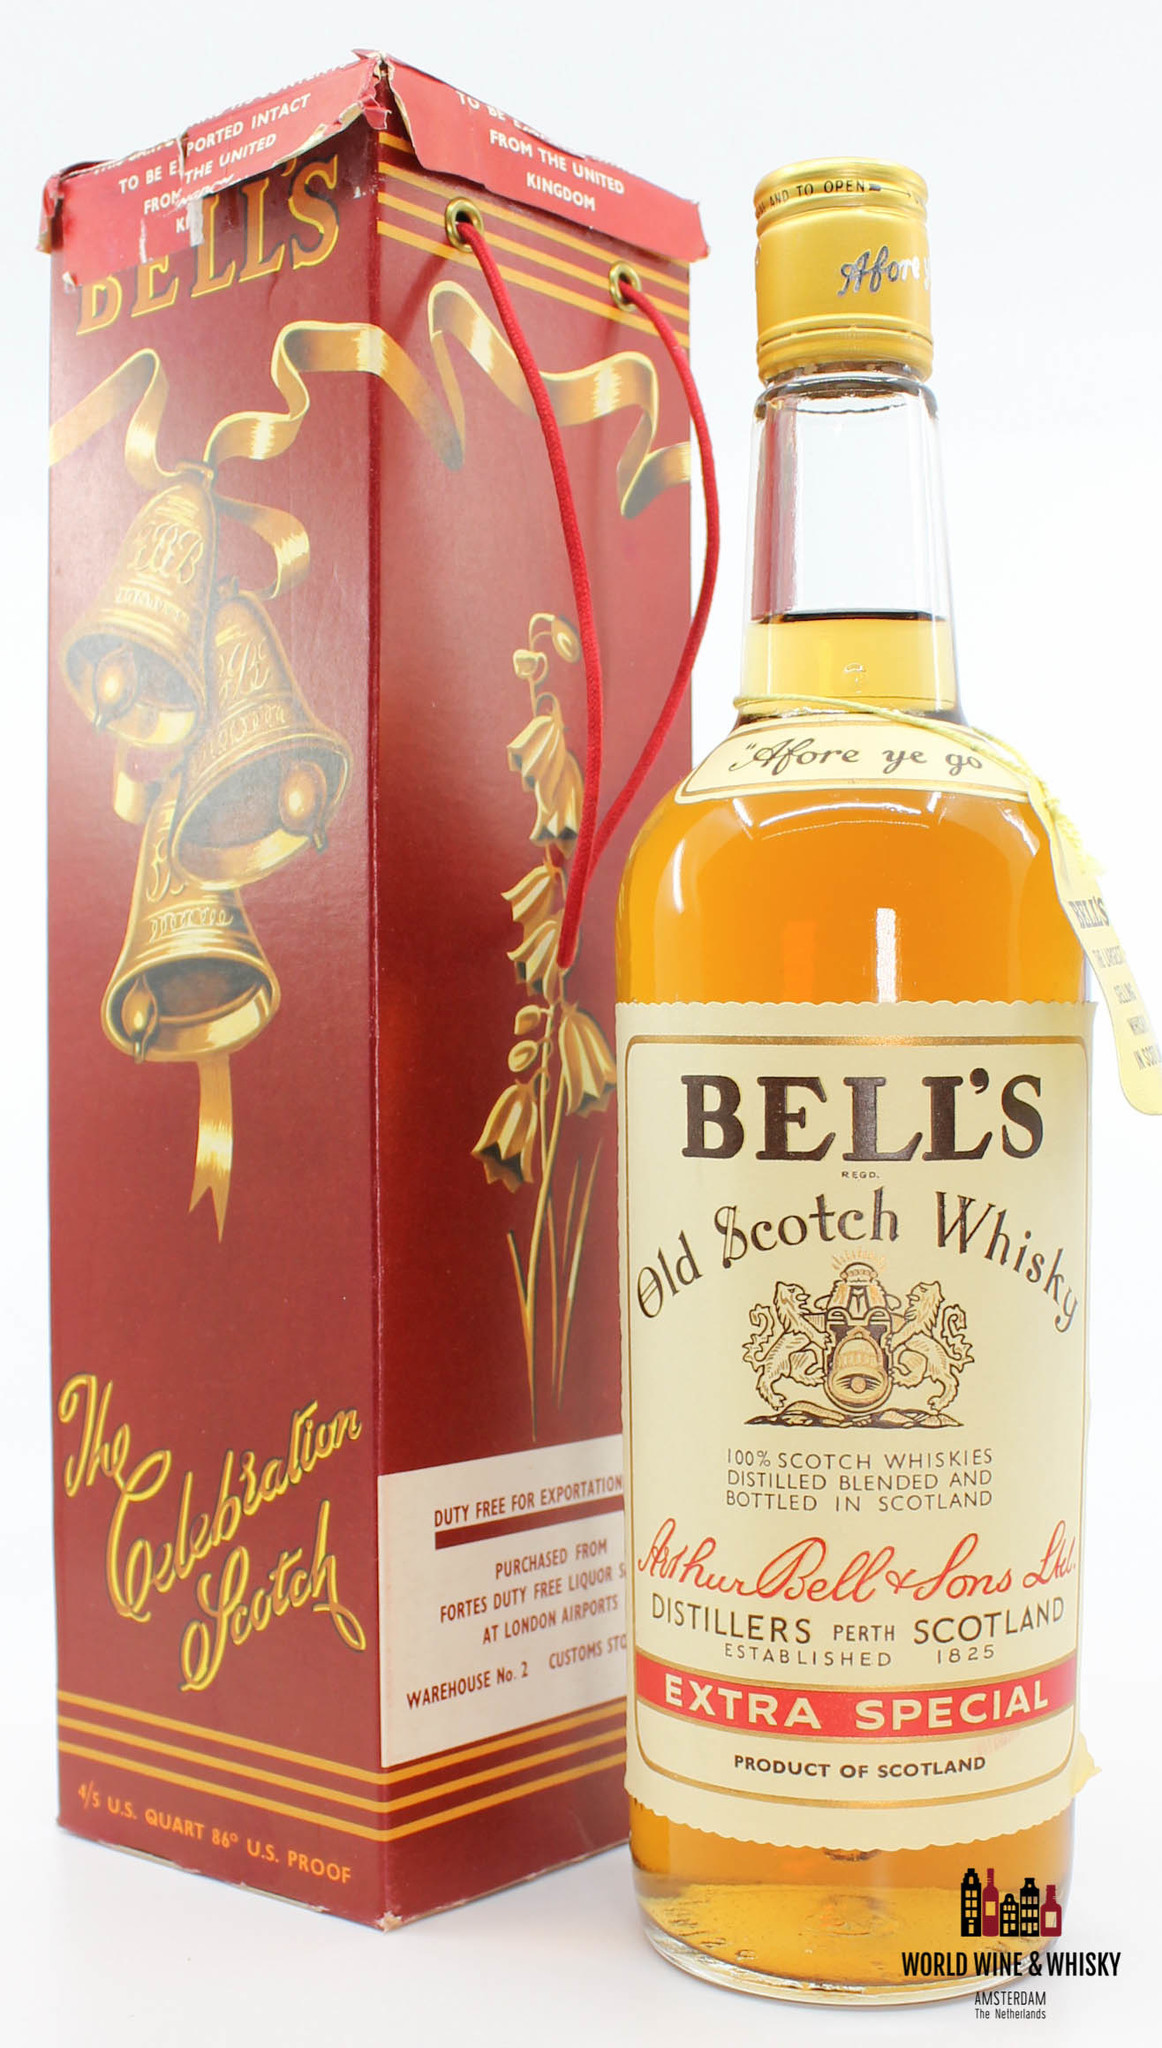 Bell's Old Scotch Whisky - Extra Special - After ye go ...